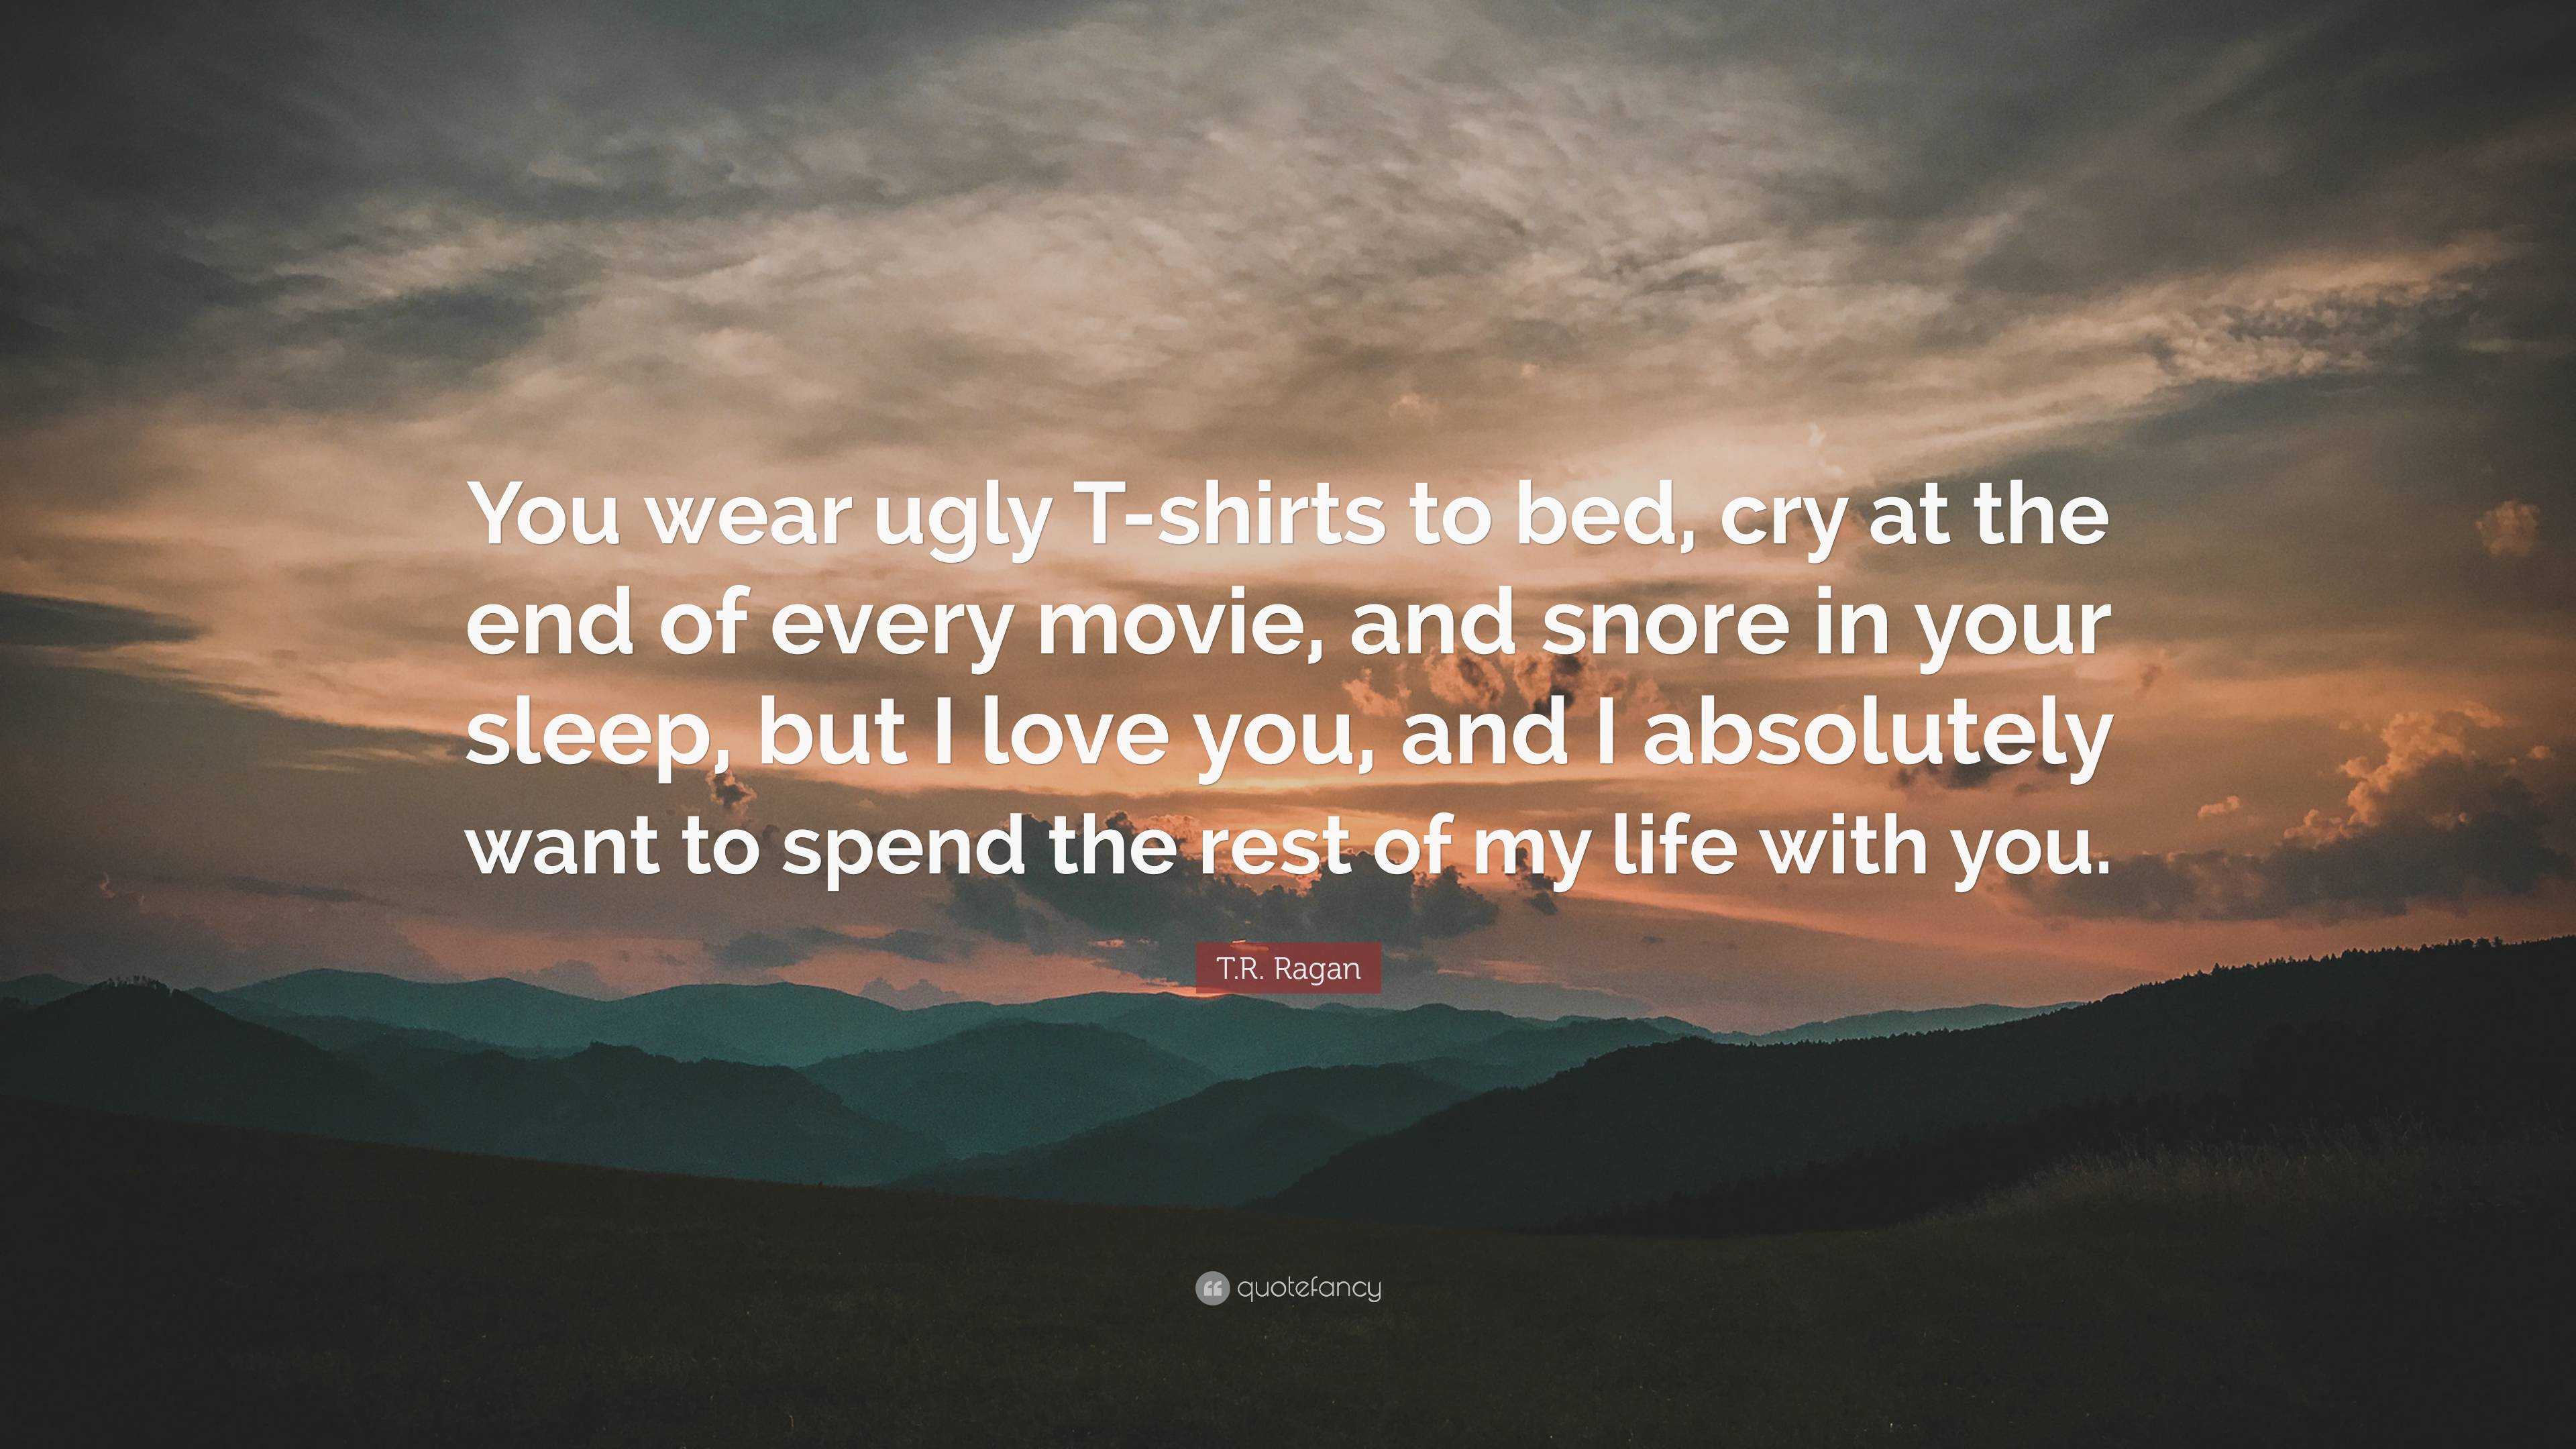 . Ragan Quote: “You wear ugly T-shirts to bed, cry at the end of every  movie, and snore in your sleep, but I love you, and I absolutely ...”